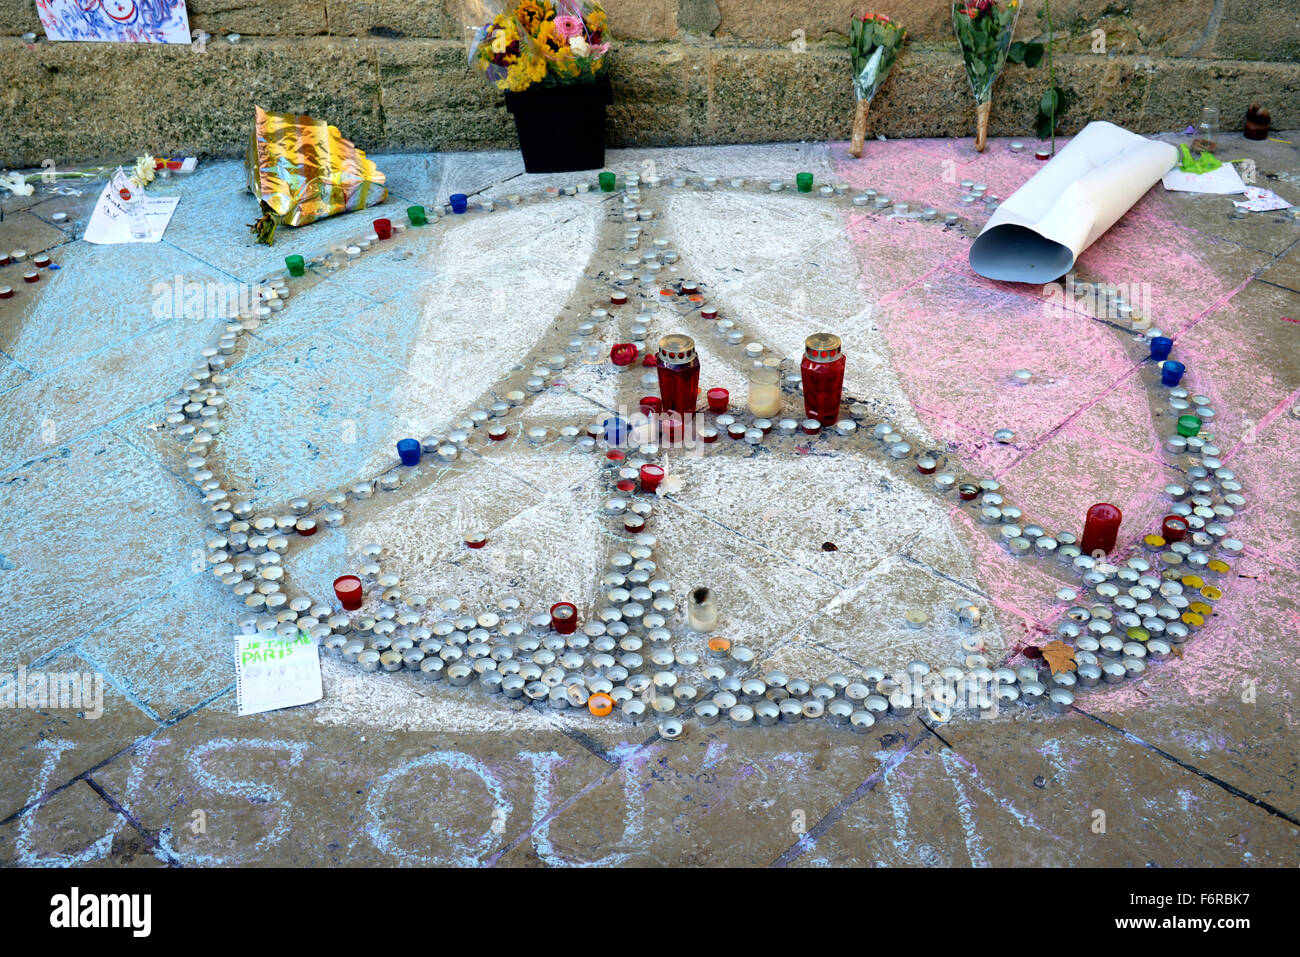 Aix-en-Provence, France. 19th November, 2015. Pray for Paris. Memorial outside the Town Hall in Aix-en-Provence, France for the victims of the Paris attacks in the form of the Eiffel Tower, the French flag and the peace symbol formed by candles. Credit:  Chris Hellier/Alamy Live News Stock Photo